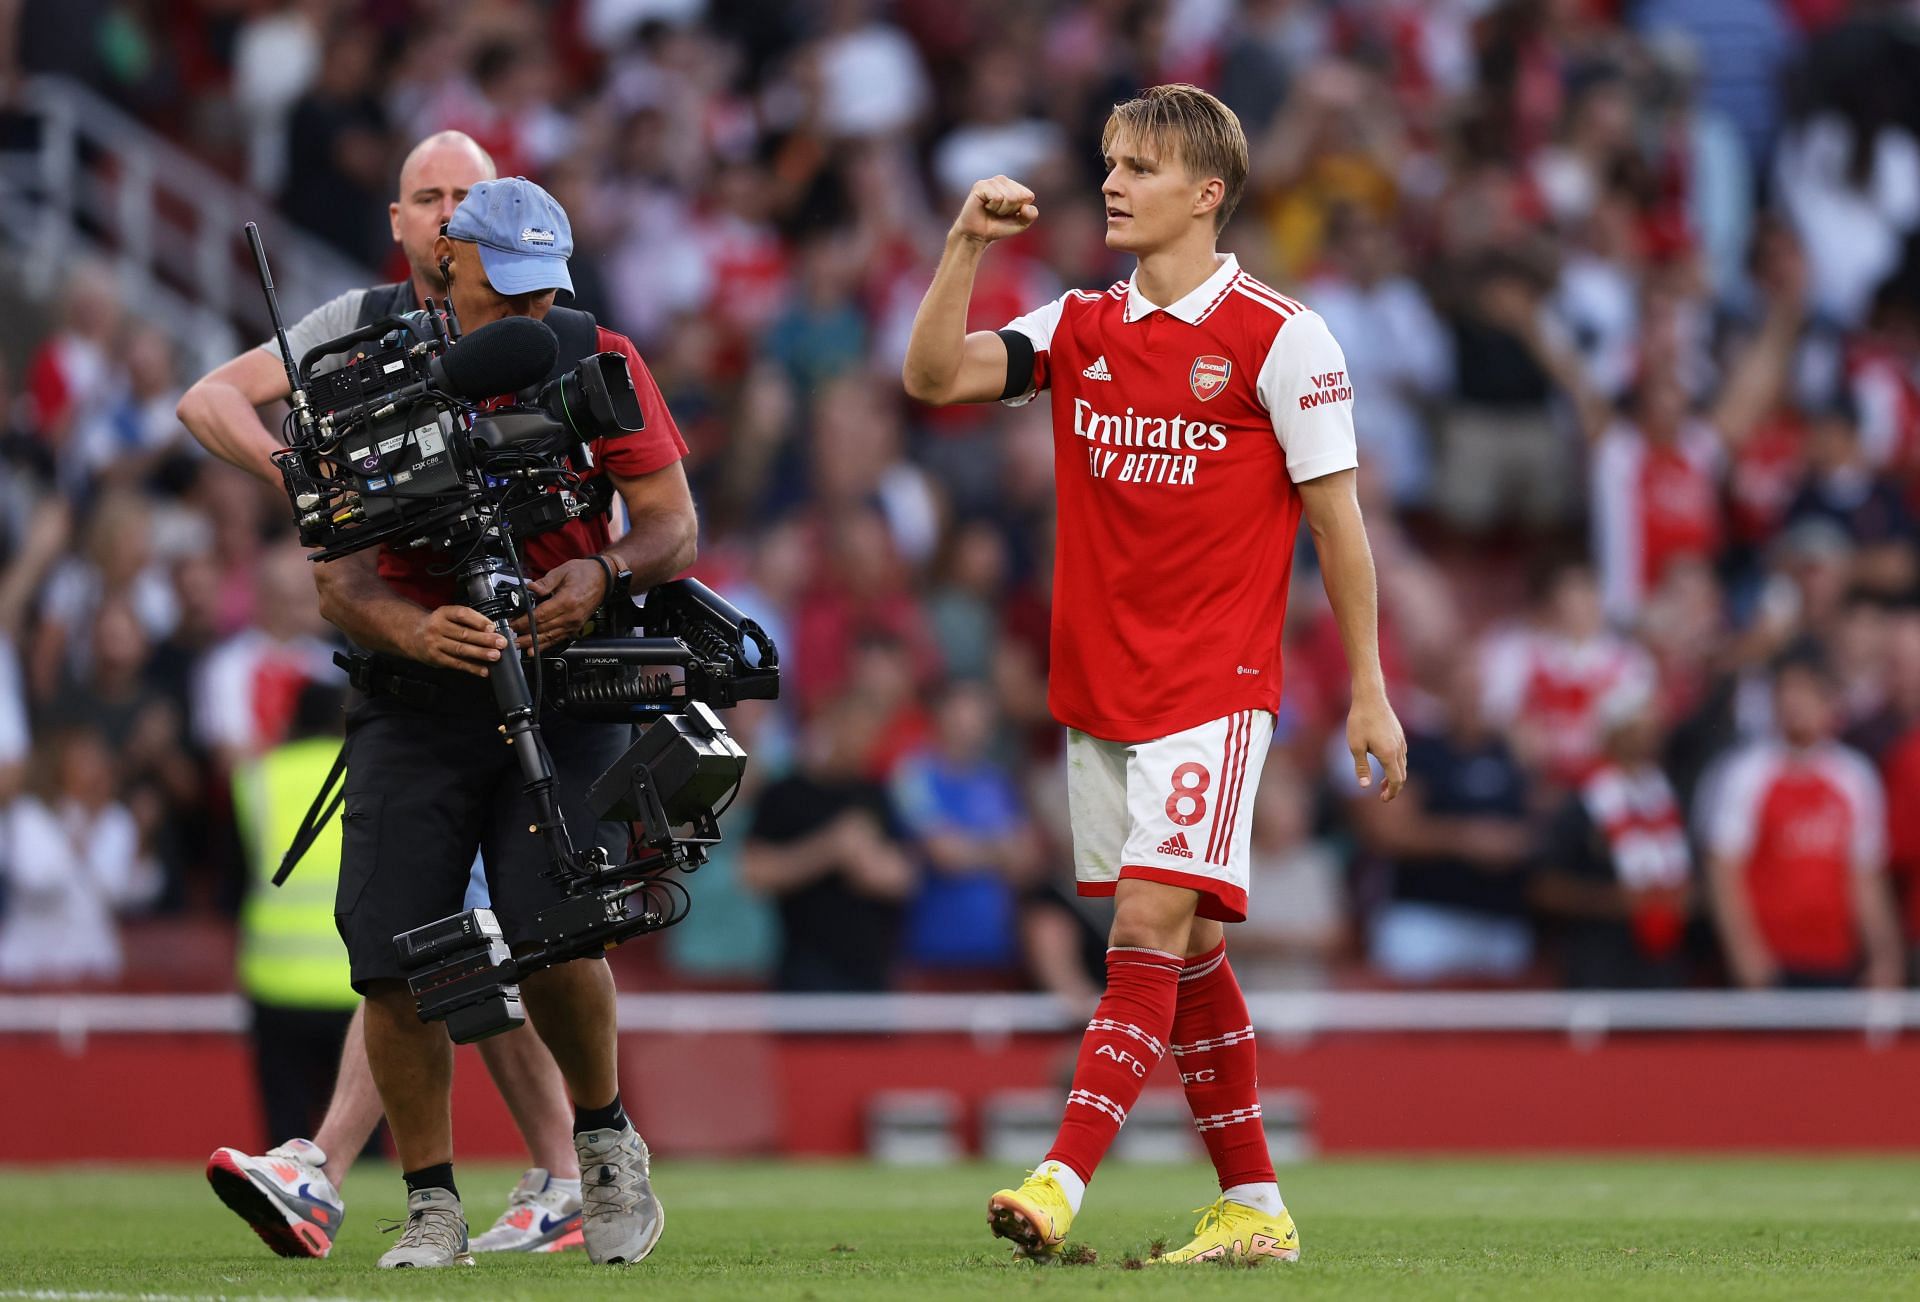 Odegaard has shone for the Gunners